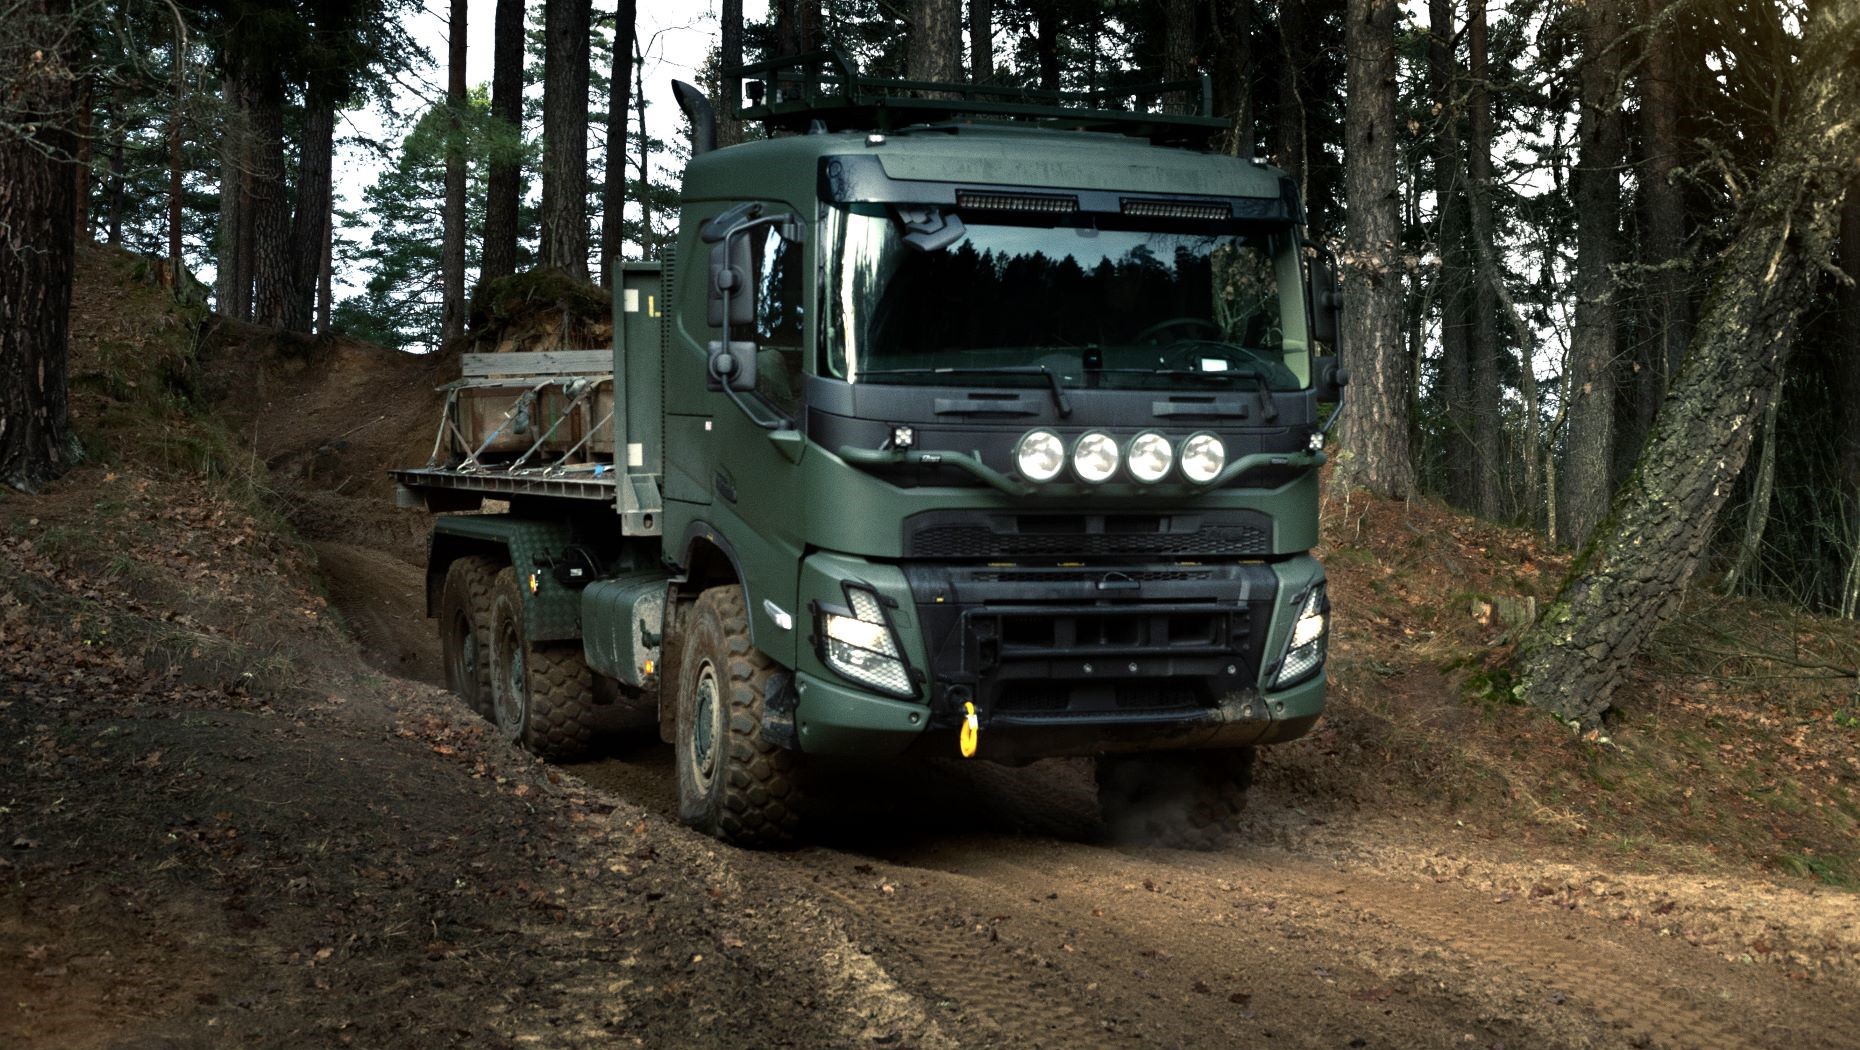 Volvo Defense enters 7-year framework agreement for deliveries of logistics trucks to Estonia and Latvia